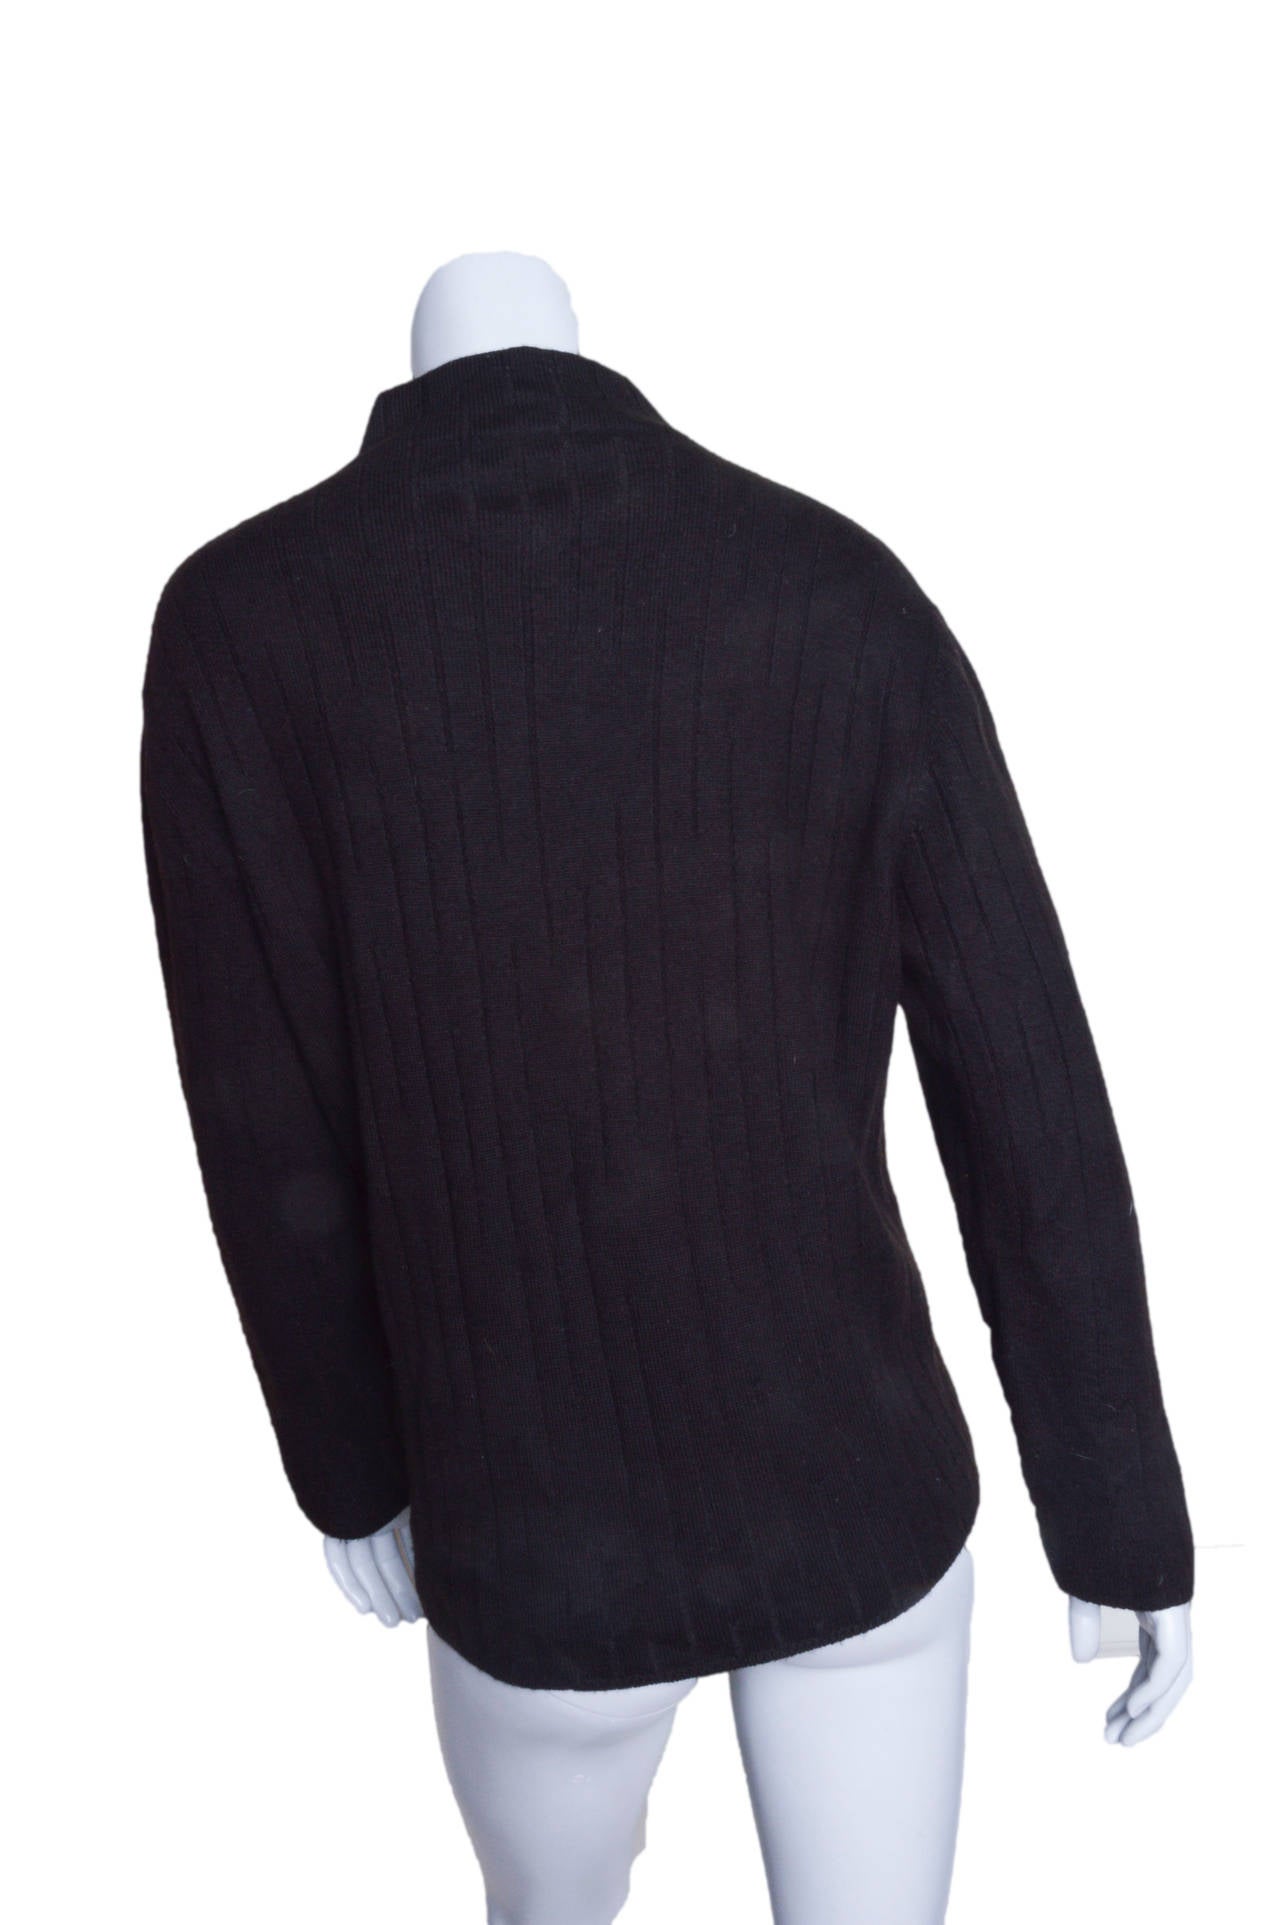 Classic vintage 1960's Hermes sweater.
Dark brown wide rib cashmere and wool blend.
Mock collar.
Easy straight fit.
Tagged a vintage size XL. 
Check measurements below for accurate modern sizing.